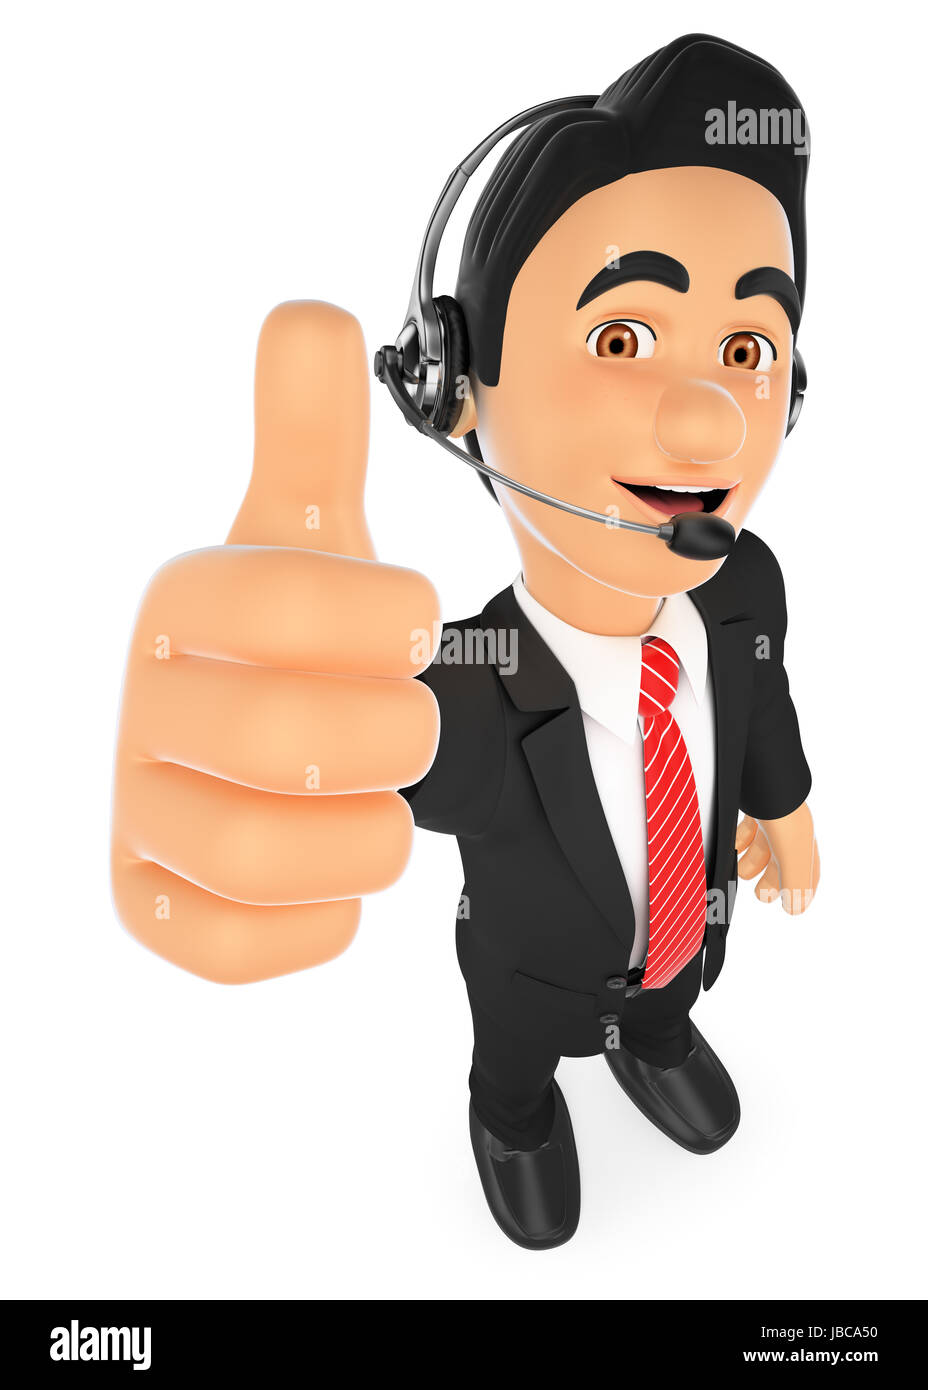 3d working people illustration.  Call center employee with thumb up. Isolated white background. Stock Photo